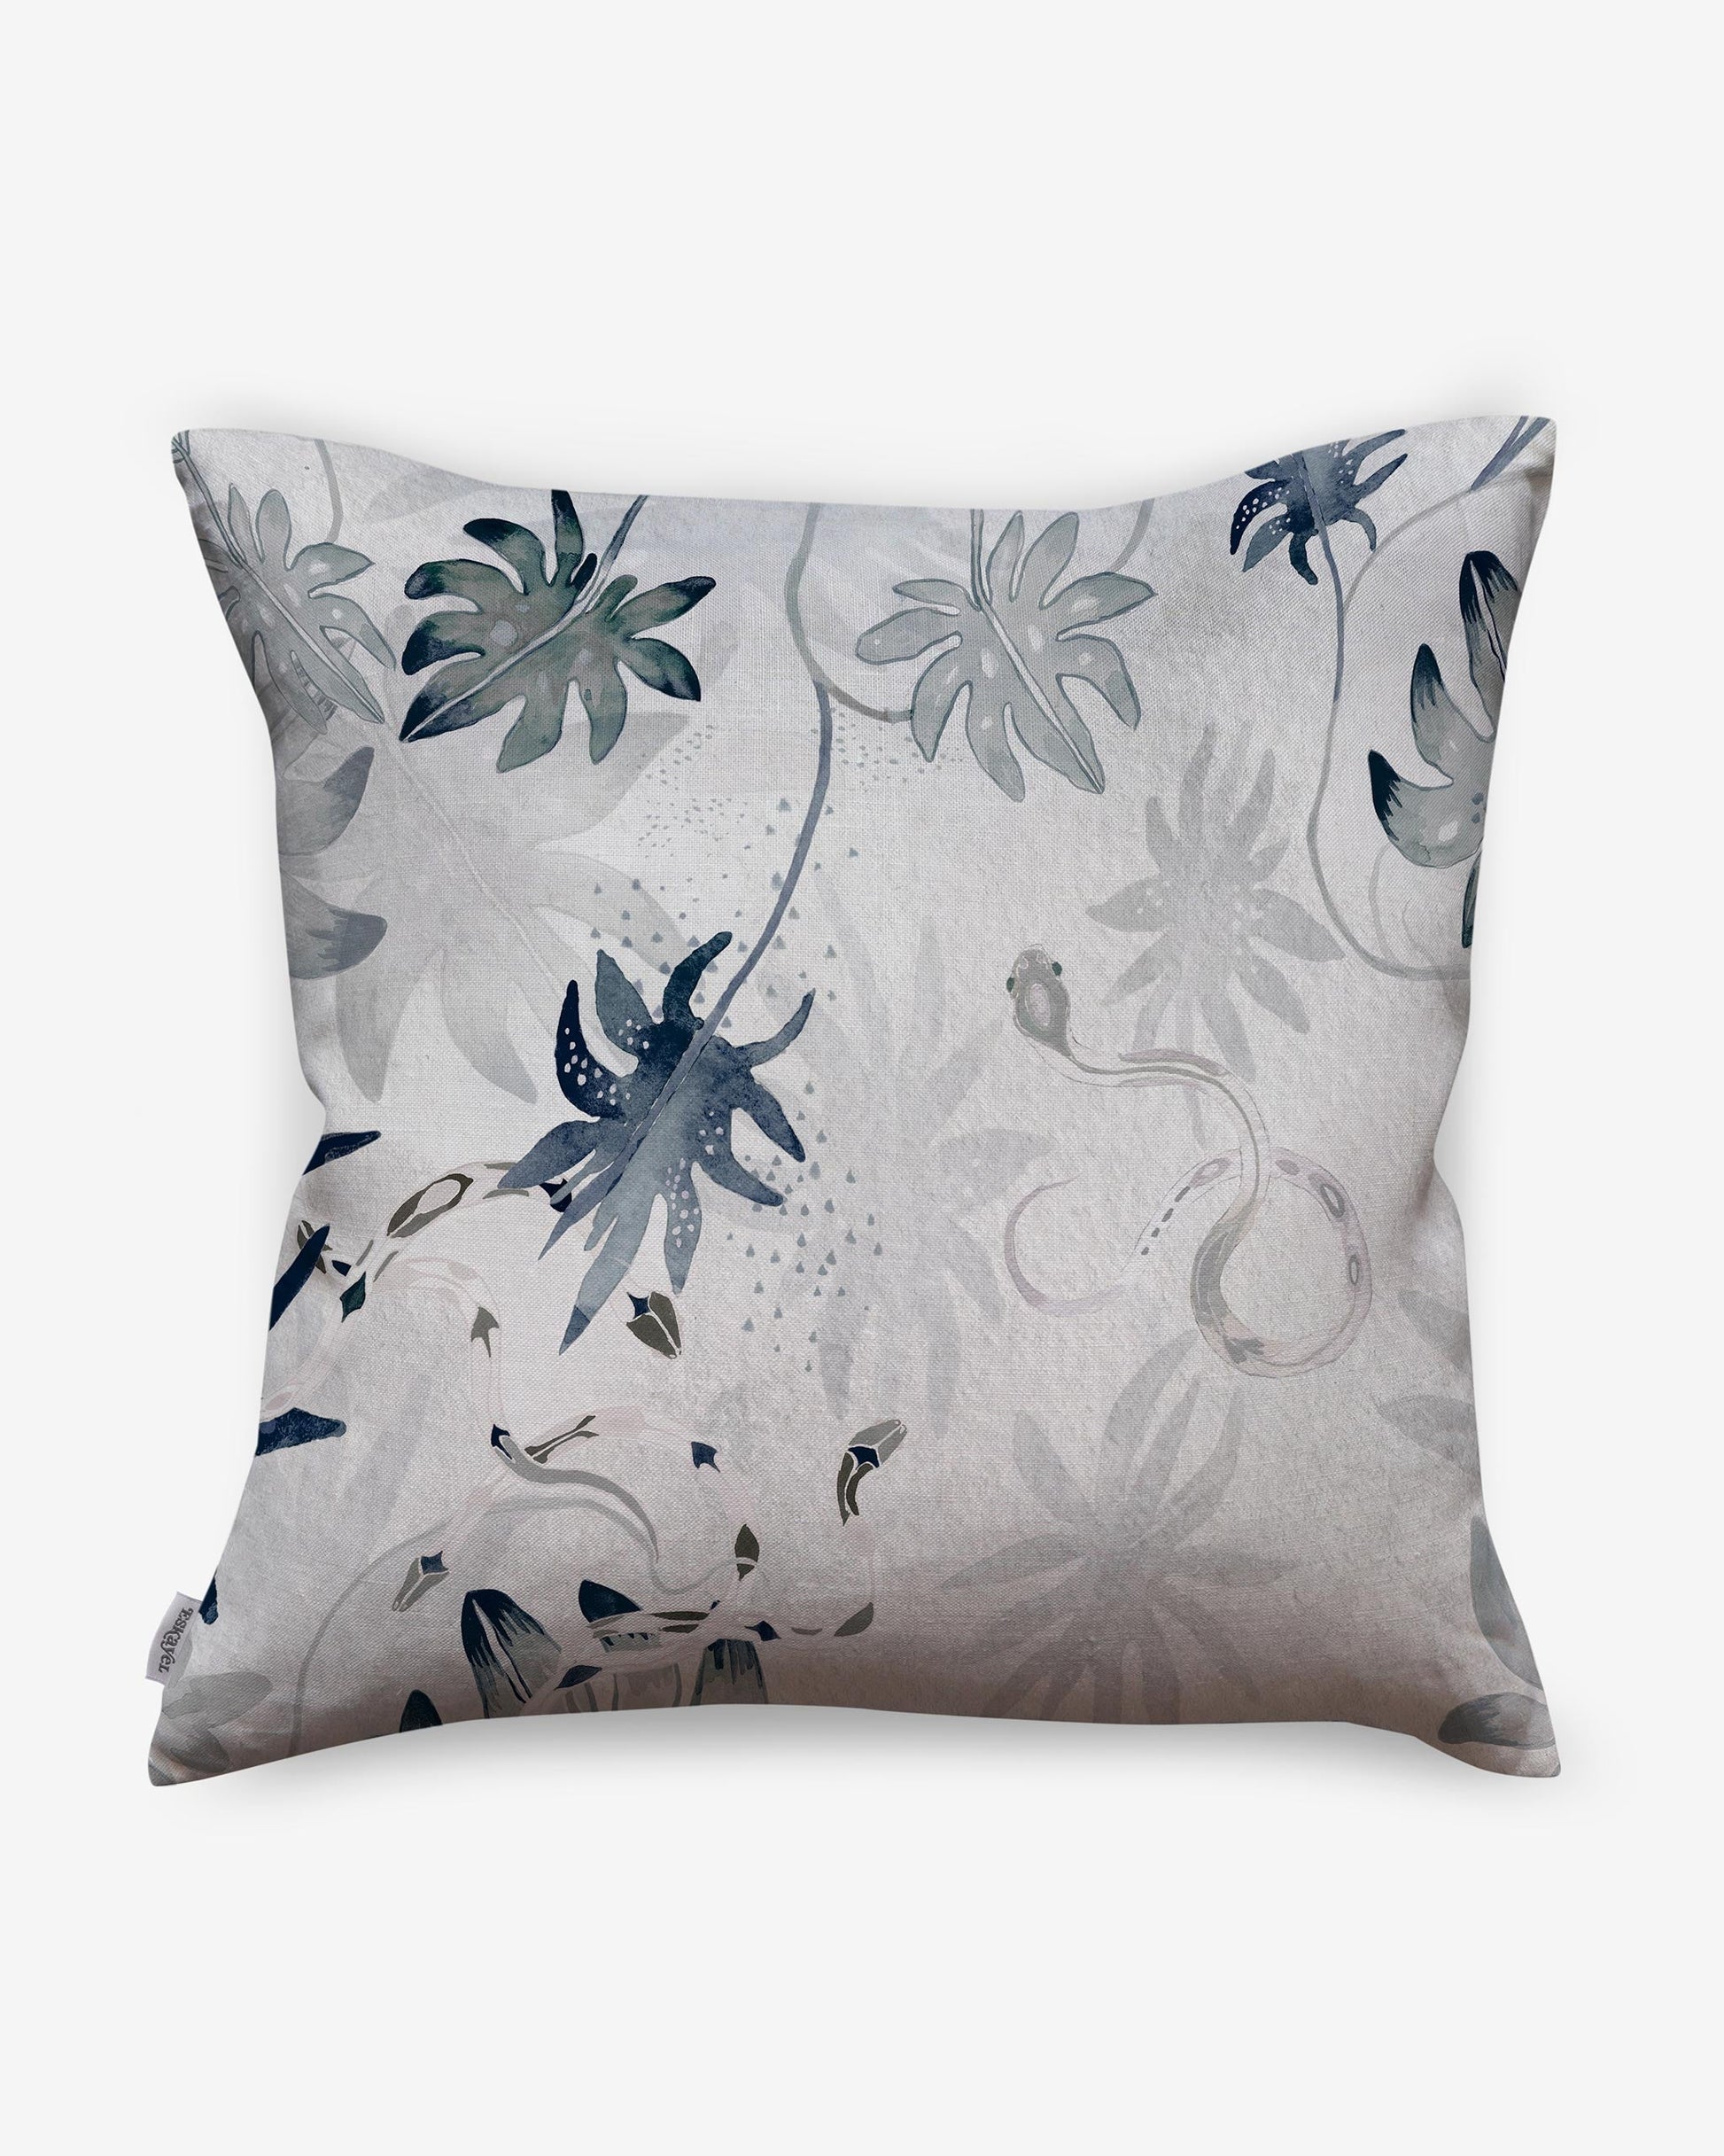 A chinoiserie-inspired Edera Pillow Ice with a blue and white floral pattern from the Eskayel collaboration